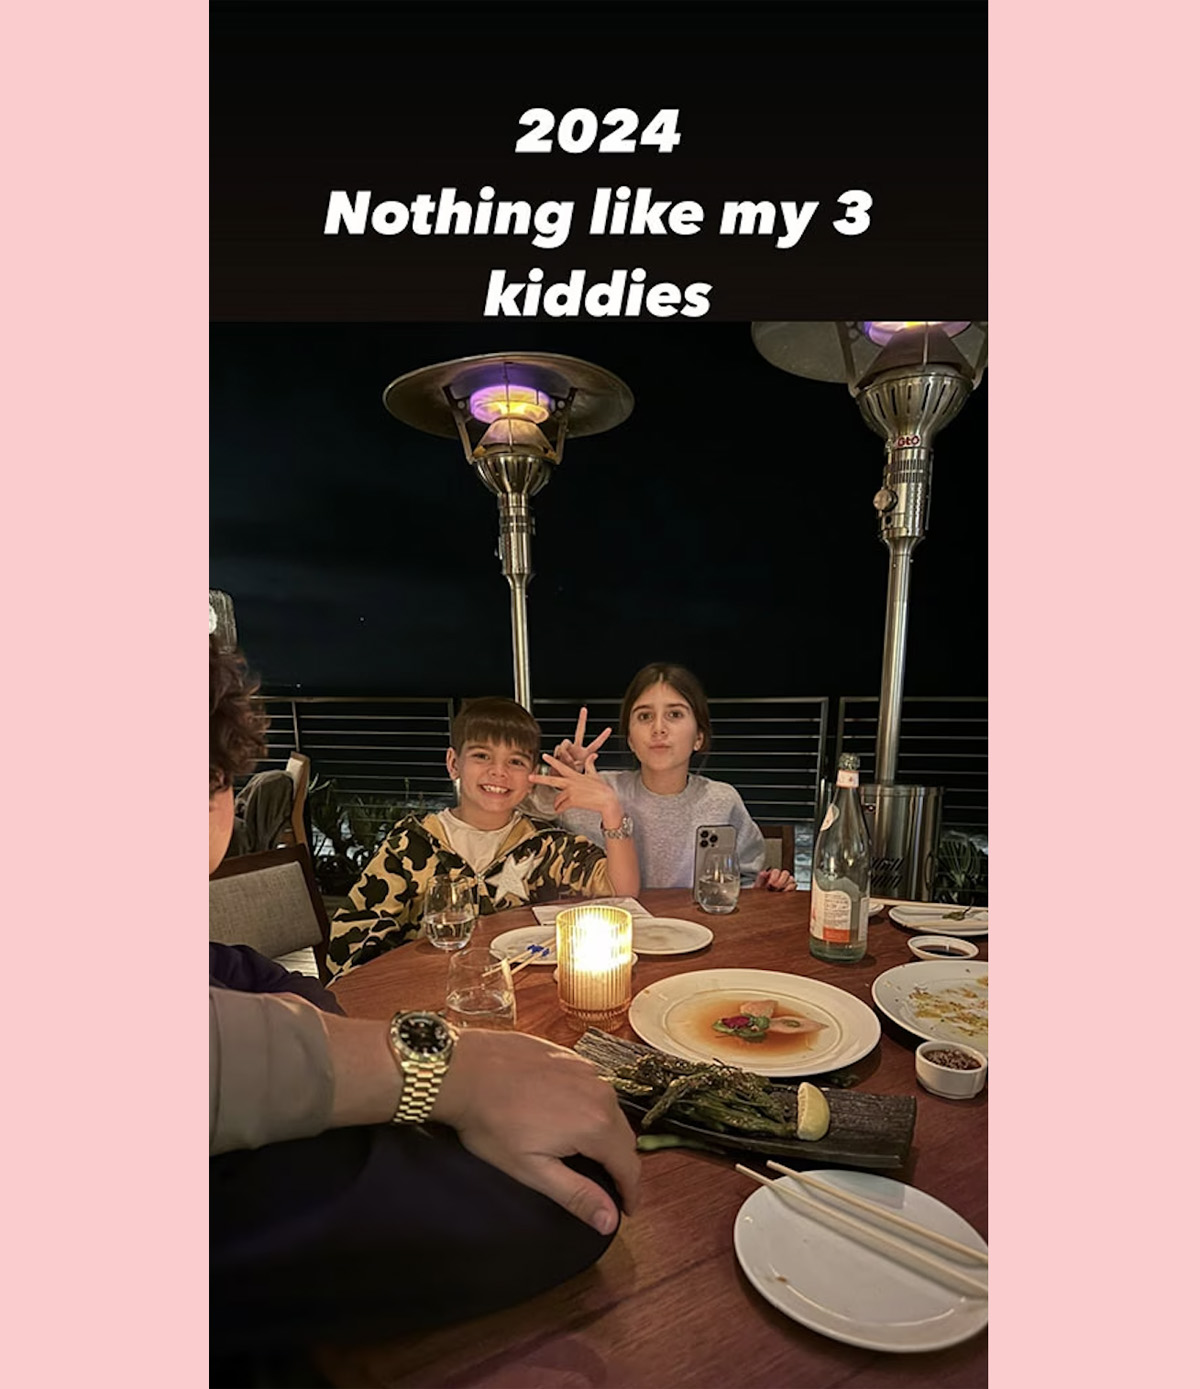 Scott Disick Rings In The First Weekend Of 2024 With New Pic Of His Fast-Growing Kids! Look!